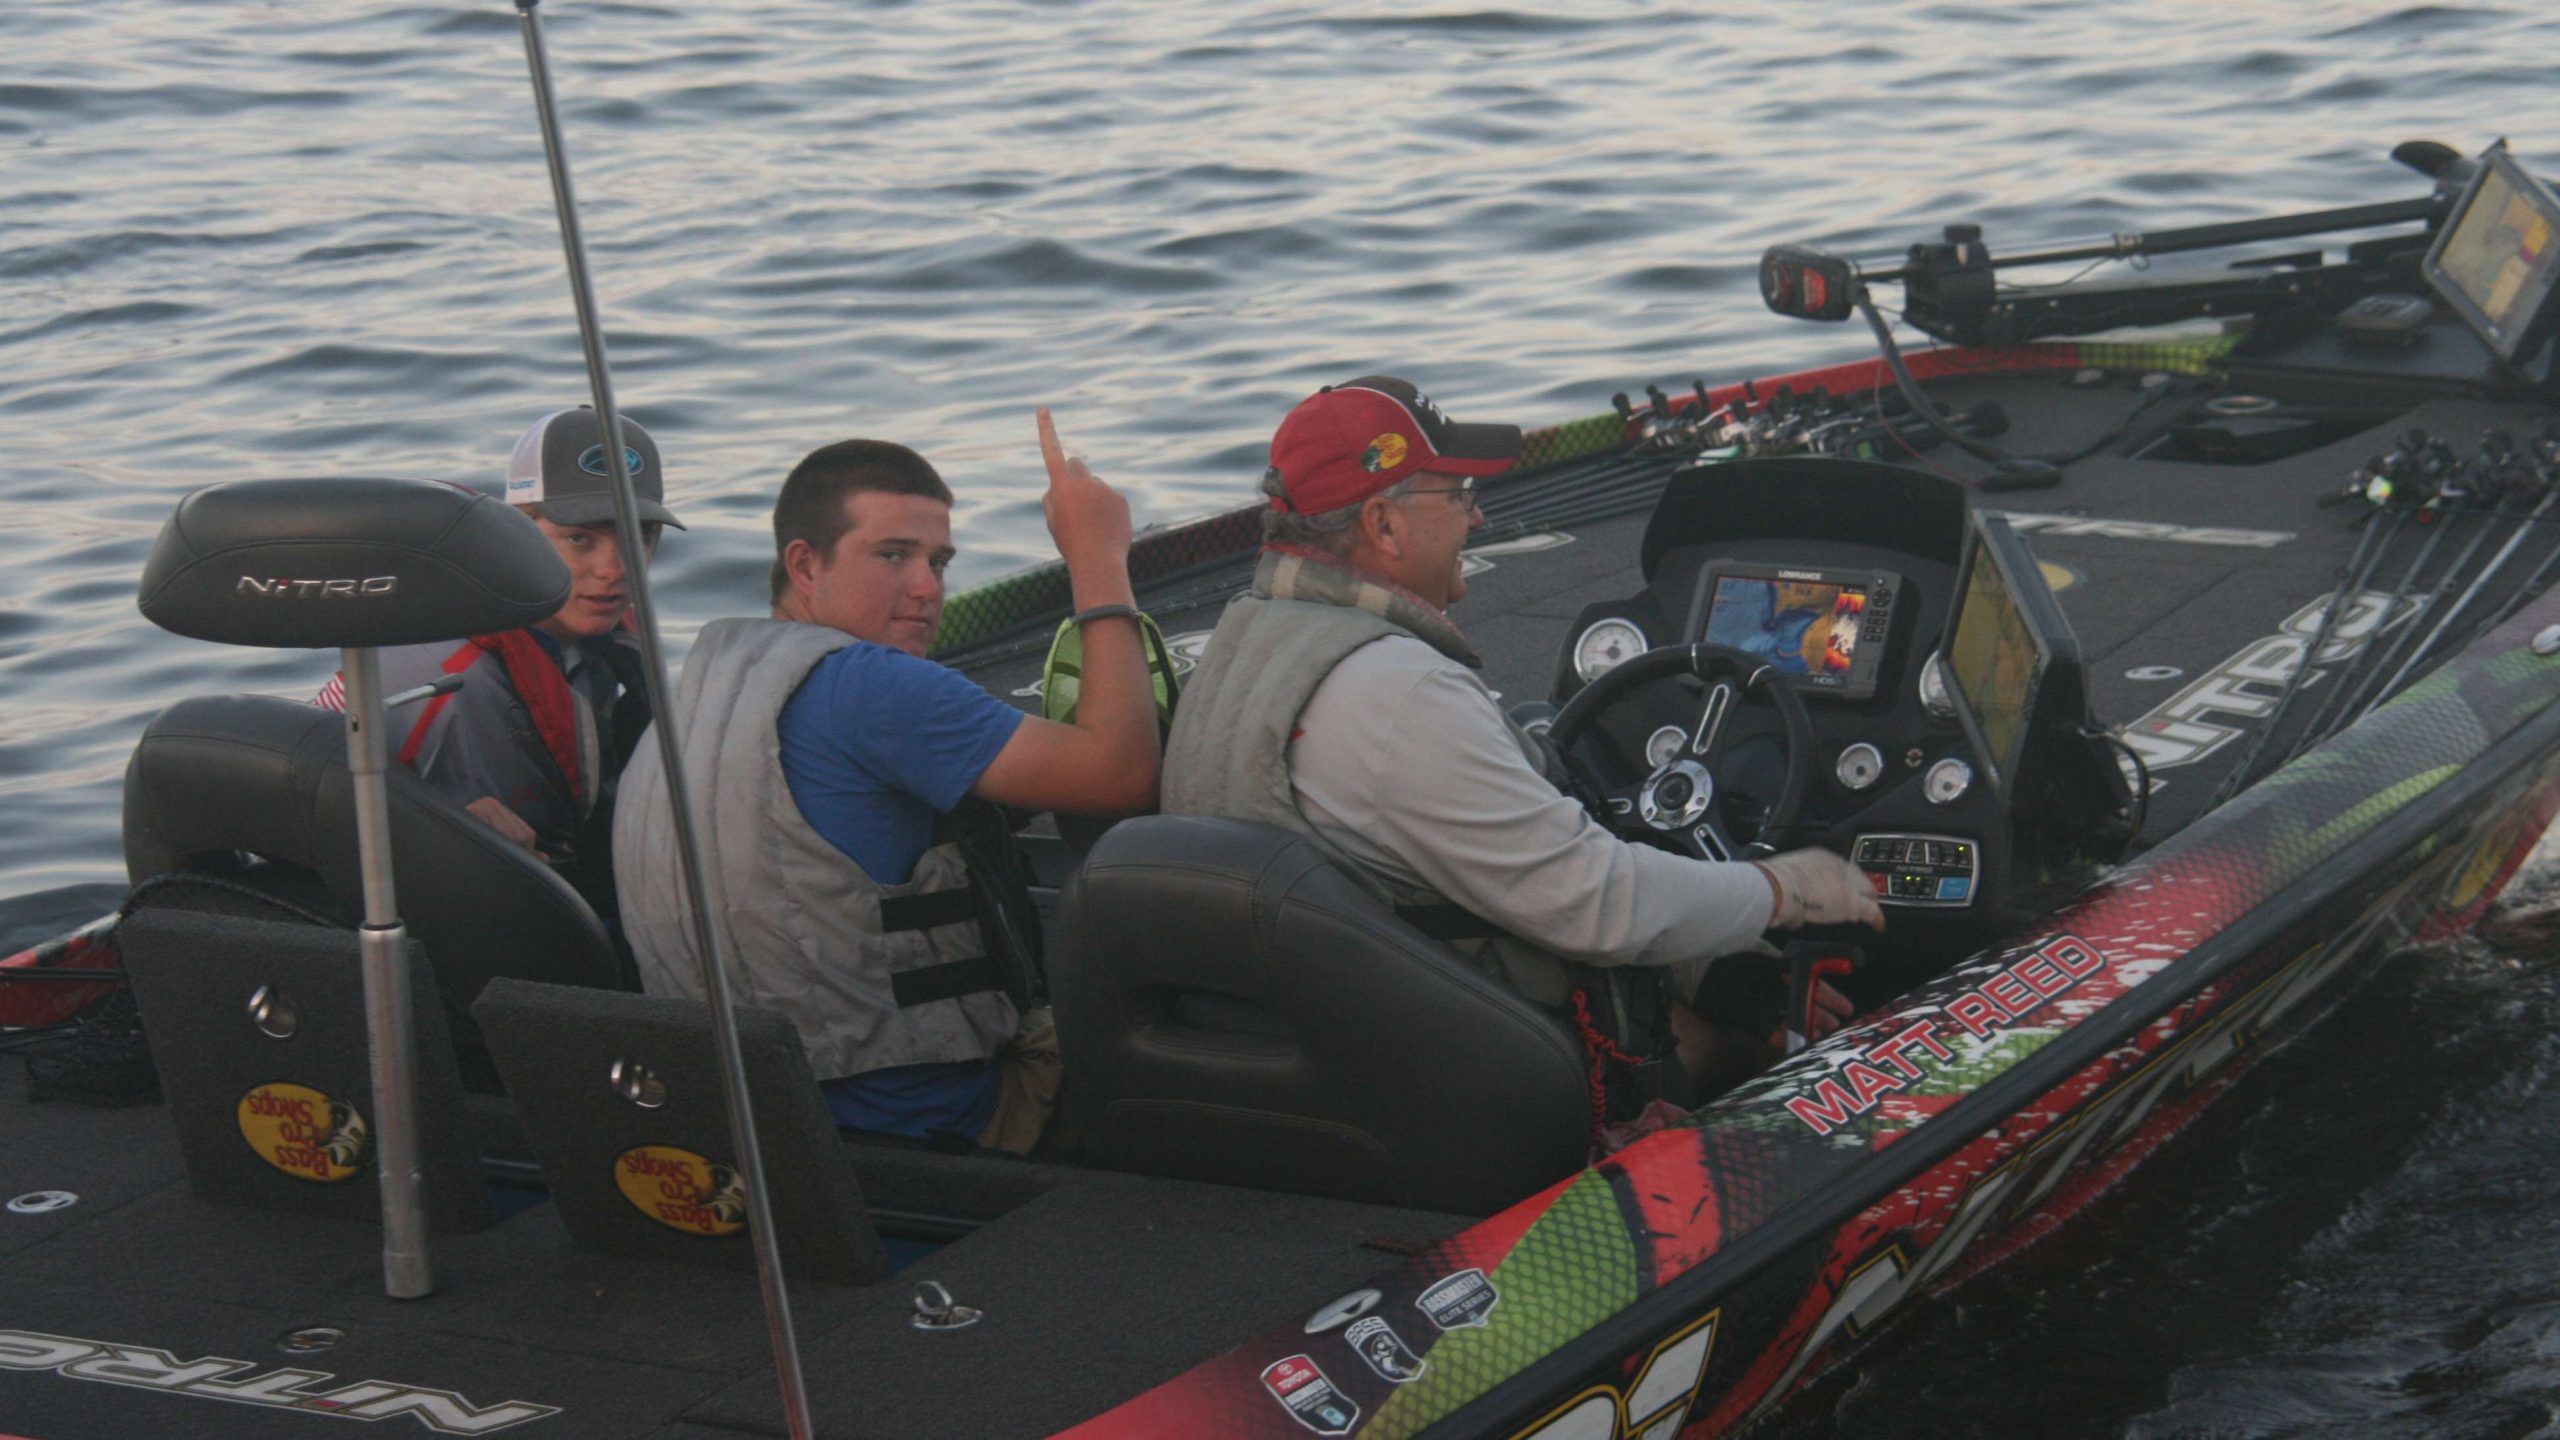 Reed and his young charges are hoping they finish first in the Costa Bassmaster High School Central Open. The first of four flights is due back at 2 p.m. with weigh-in at Cypress Bend Park.